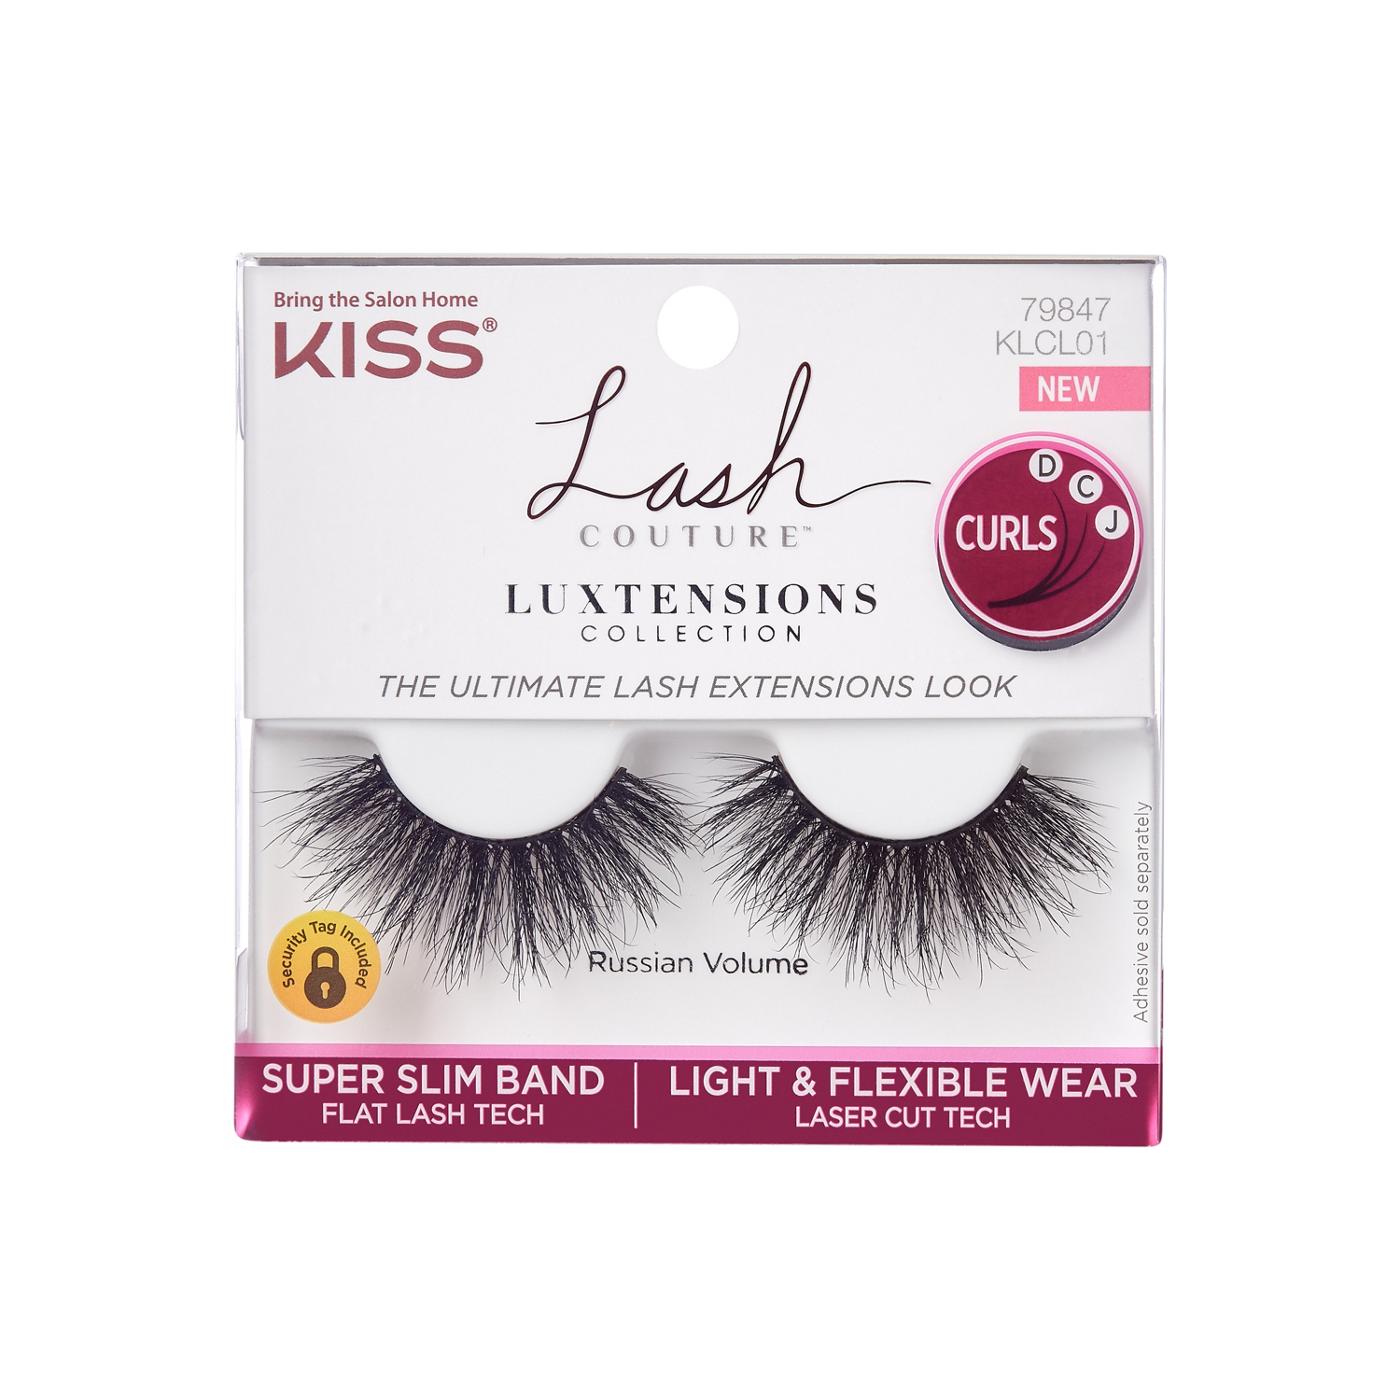 KISS Lash Couture Luxtensions Collection - Russian Volume; image 1 of 6